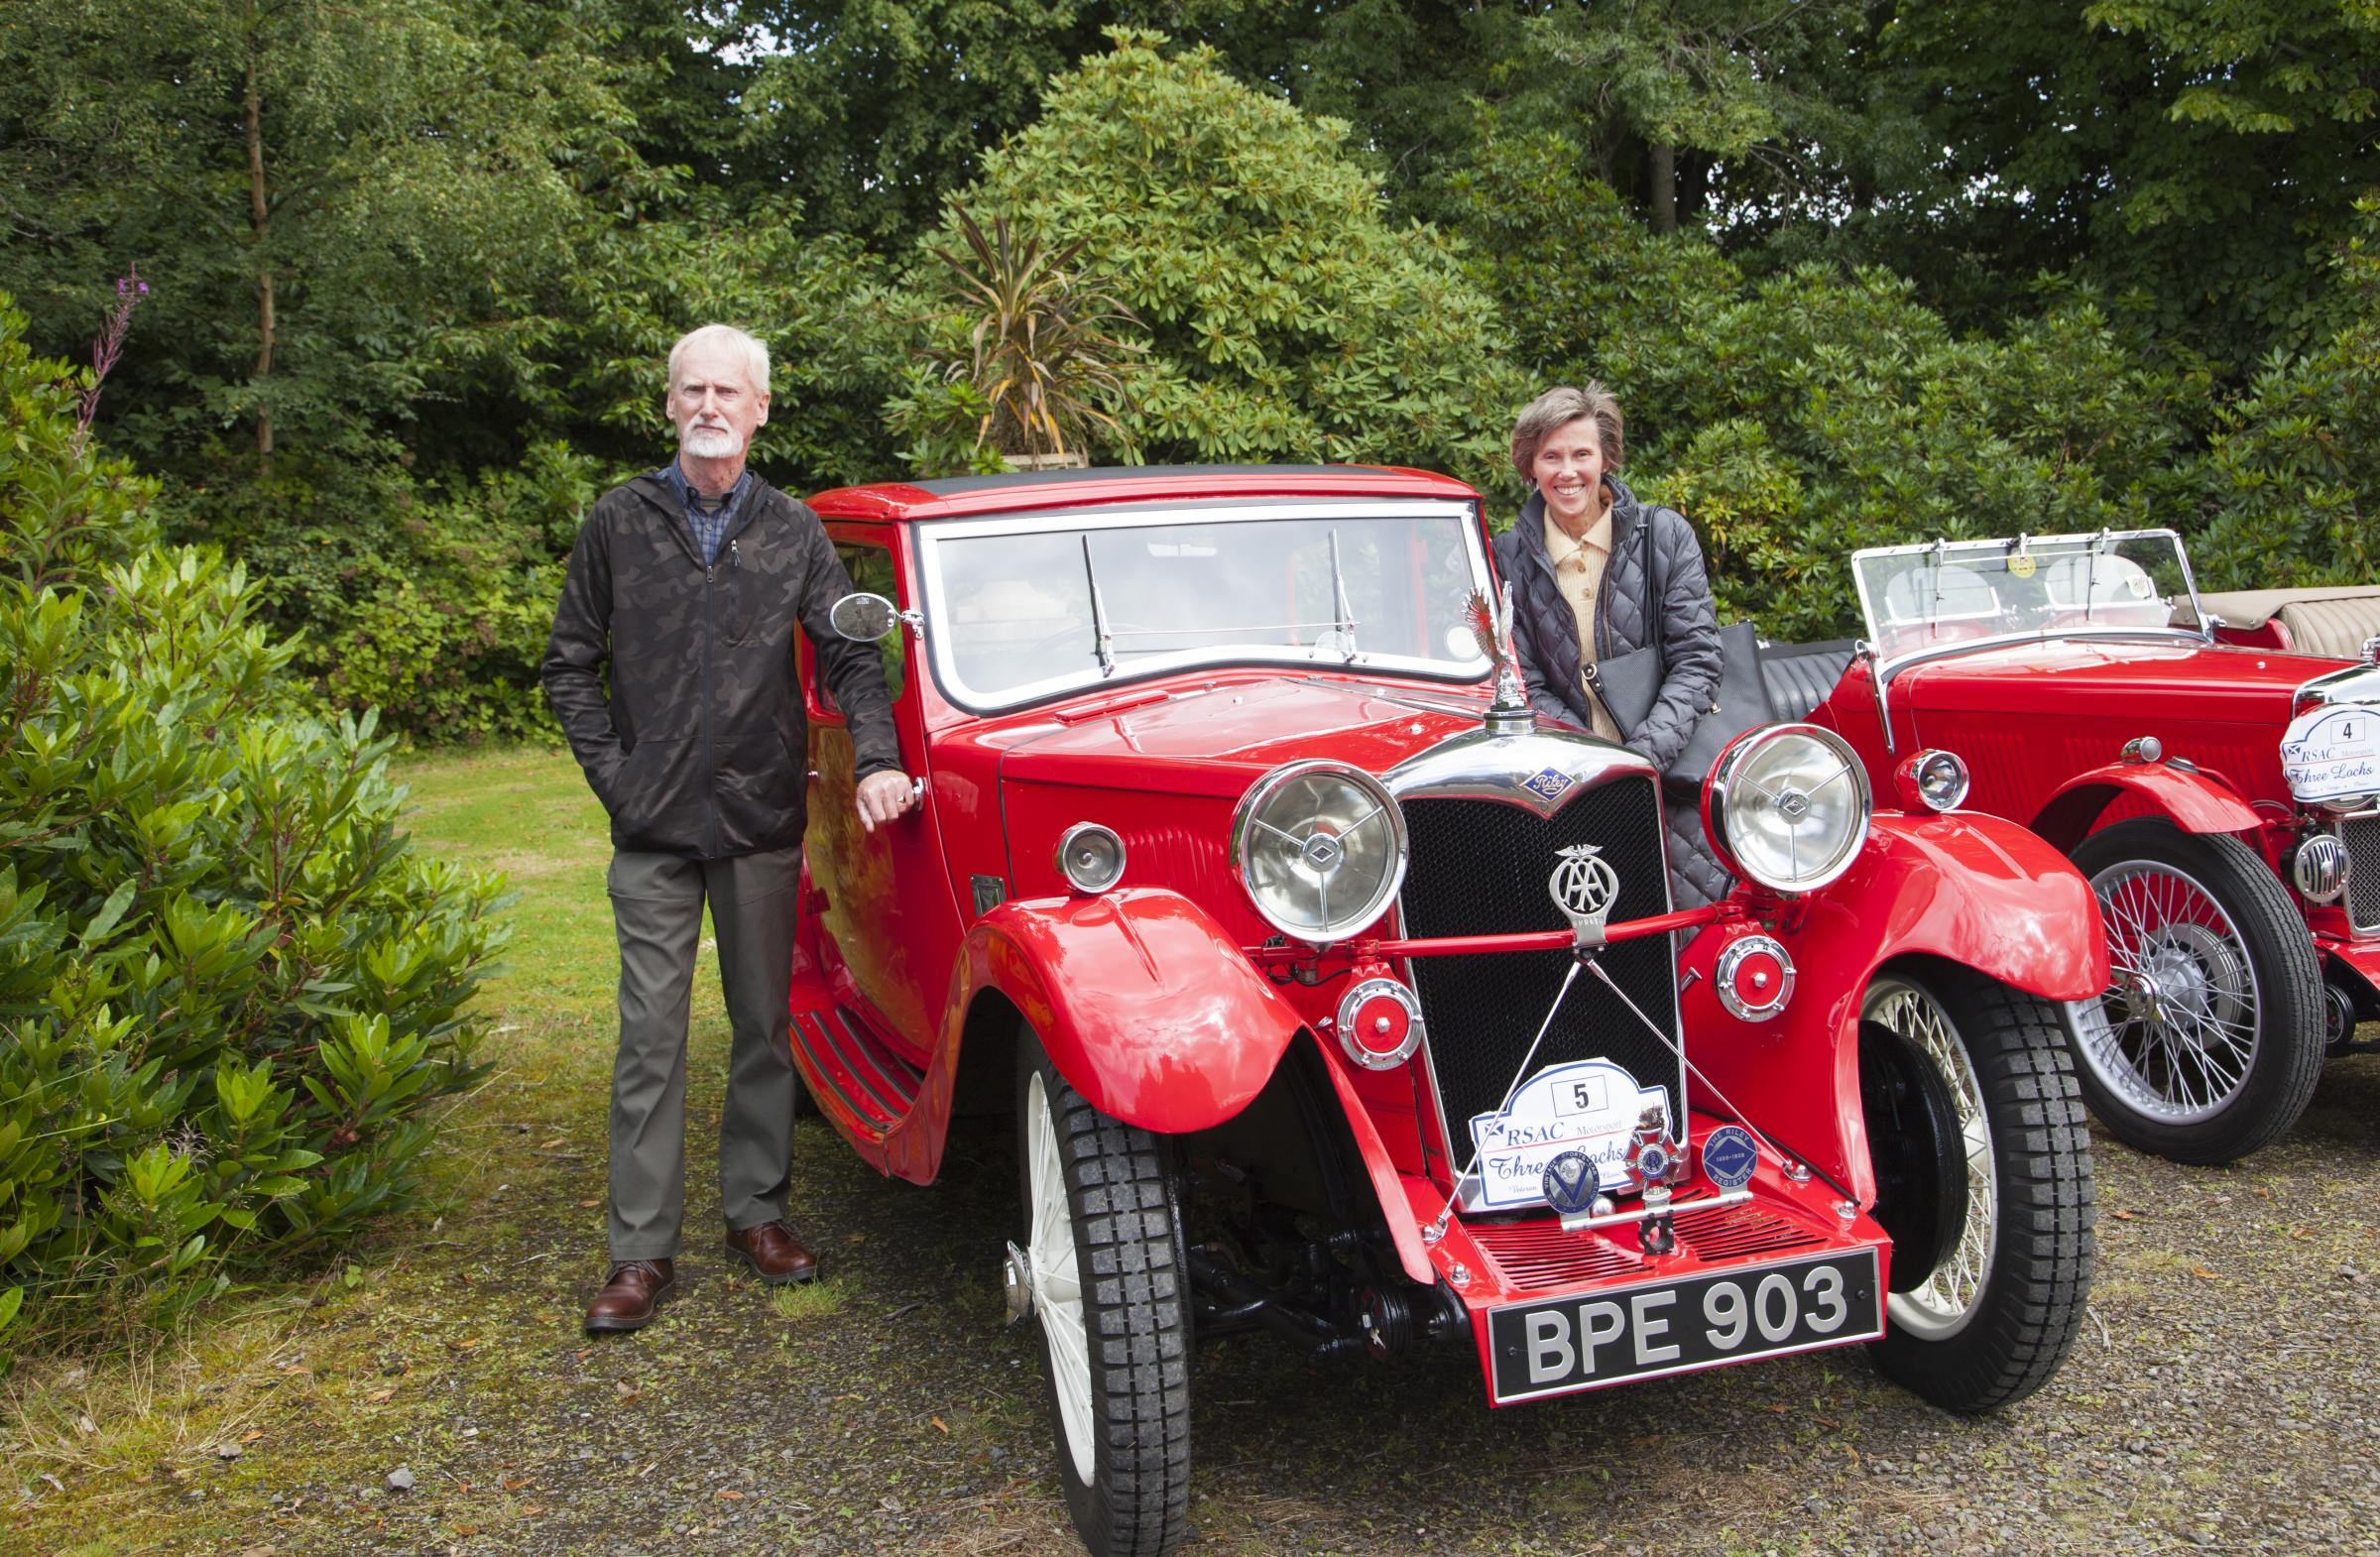 Mitchell and Jeanette Sorbie from Newton Mearns with their 1934 Riley Kestral